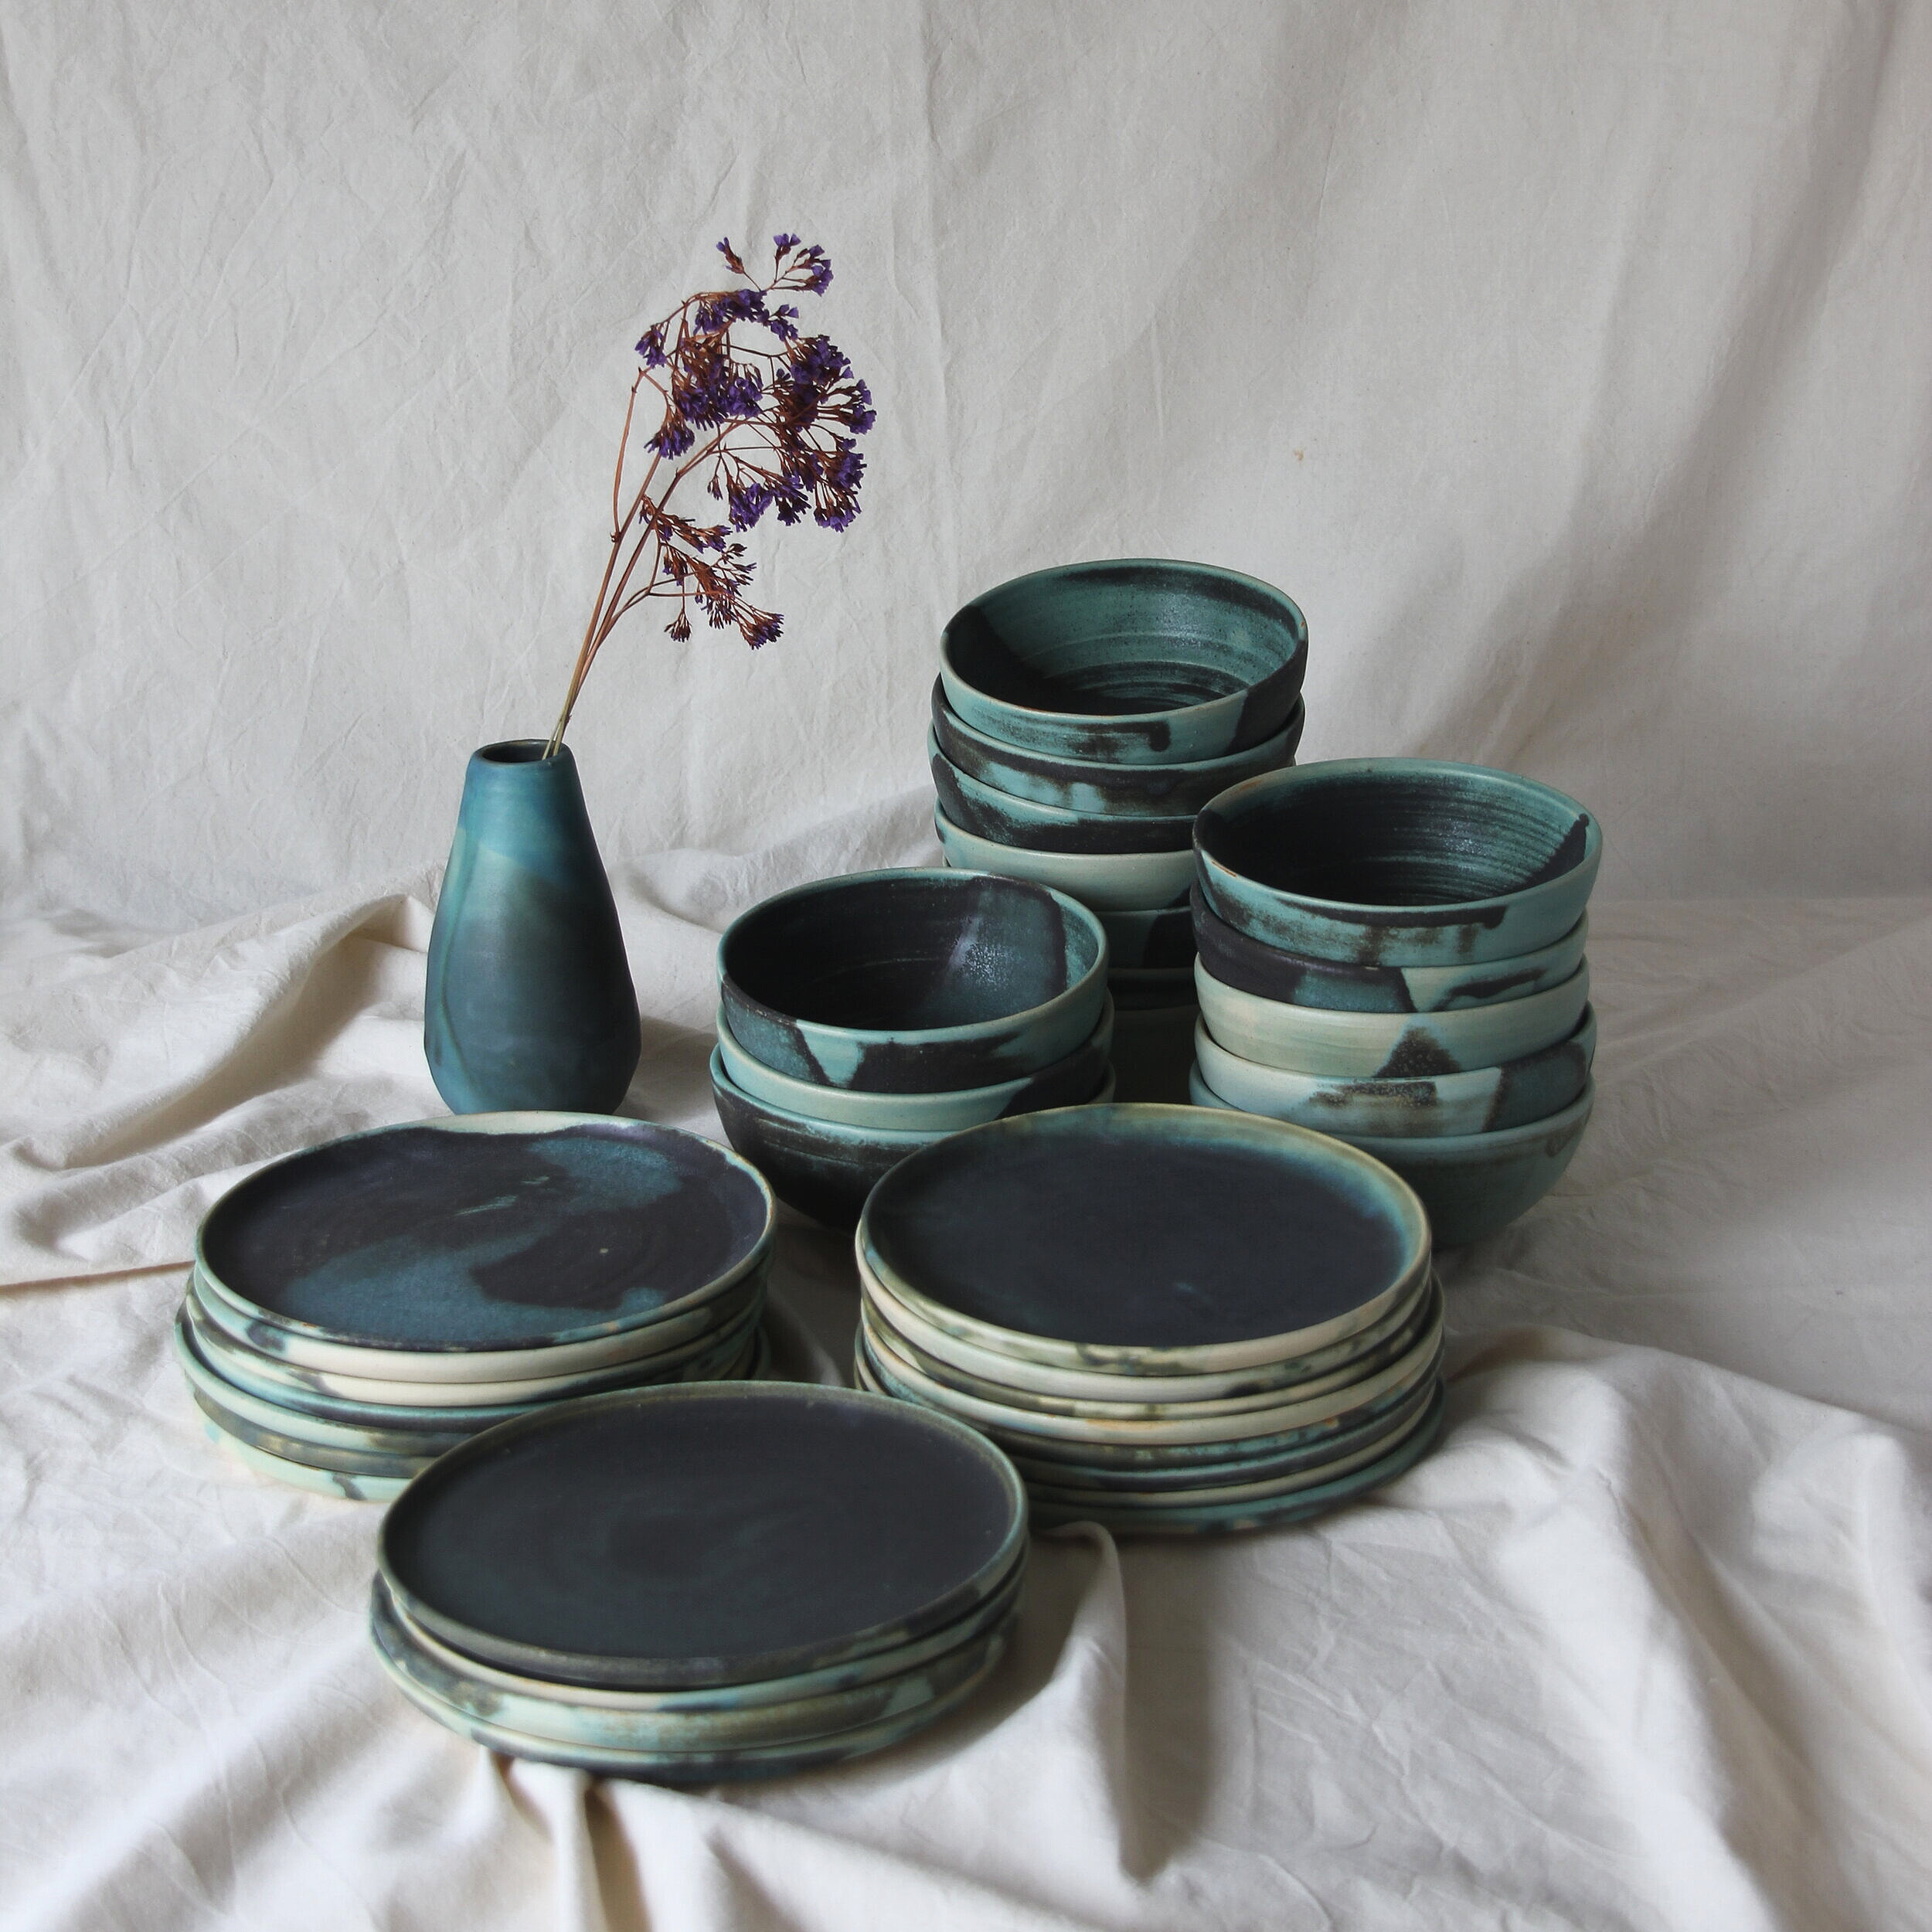 EG+plates+bowls+and+vase+%28not+from+order%29.jpg